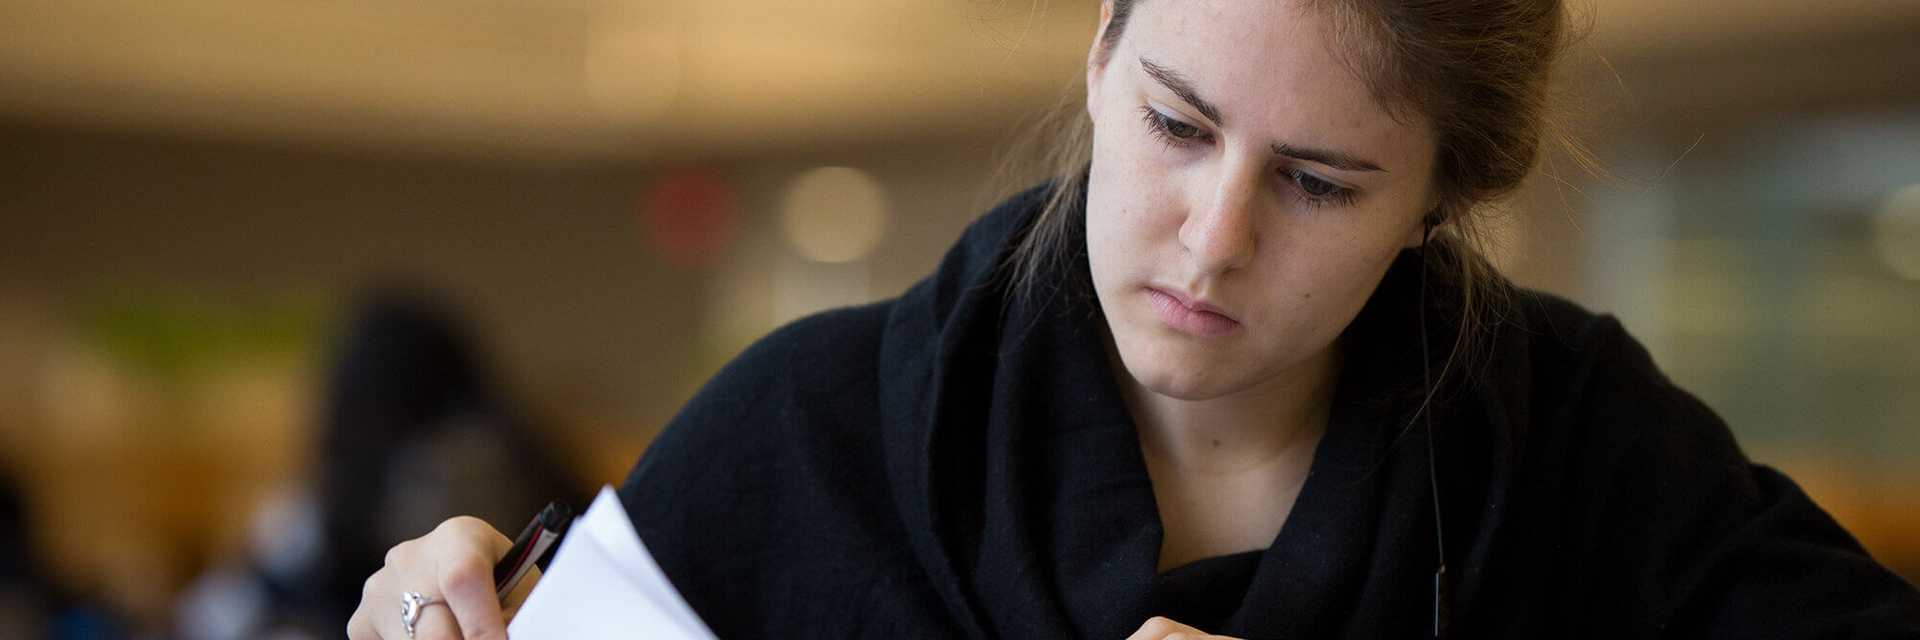 Close-up photo of a Case Western Reserve University student studying indoors